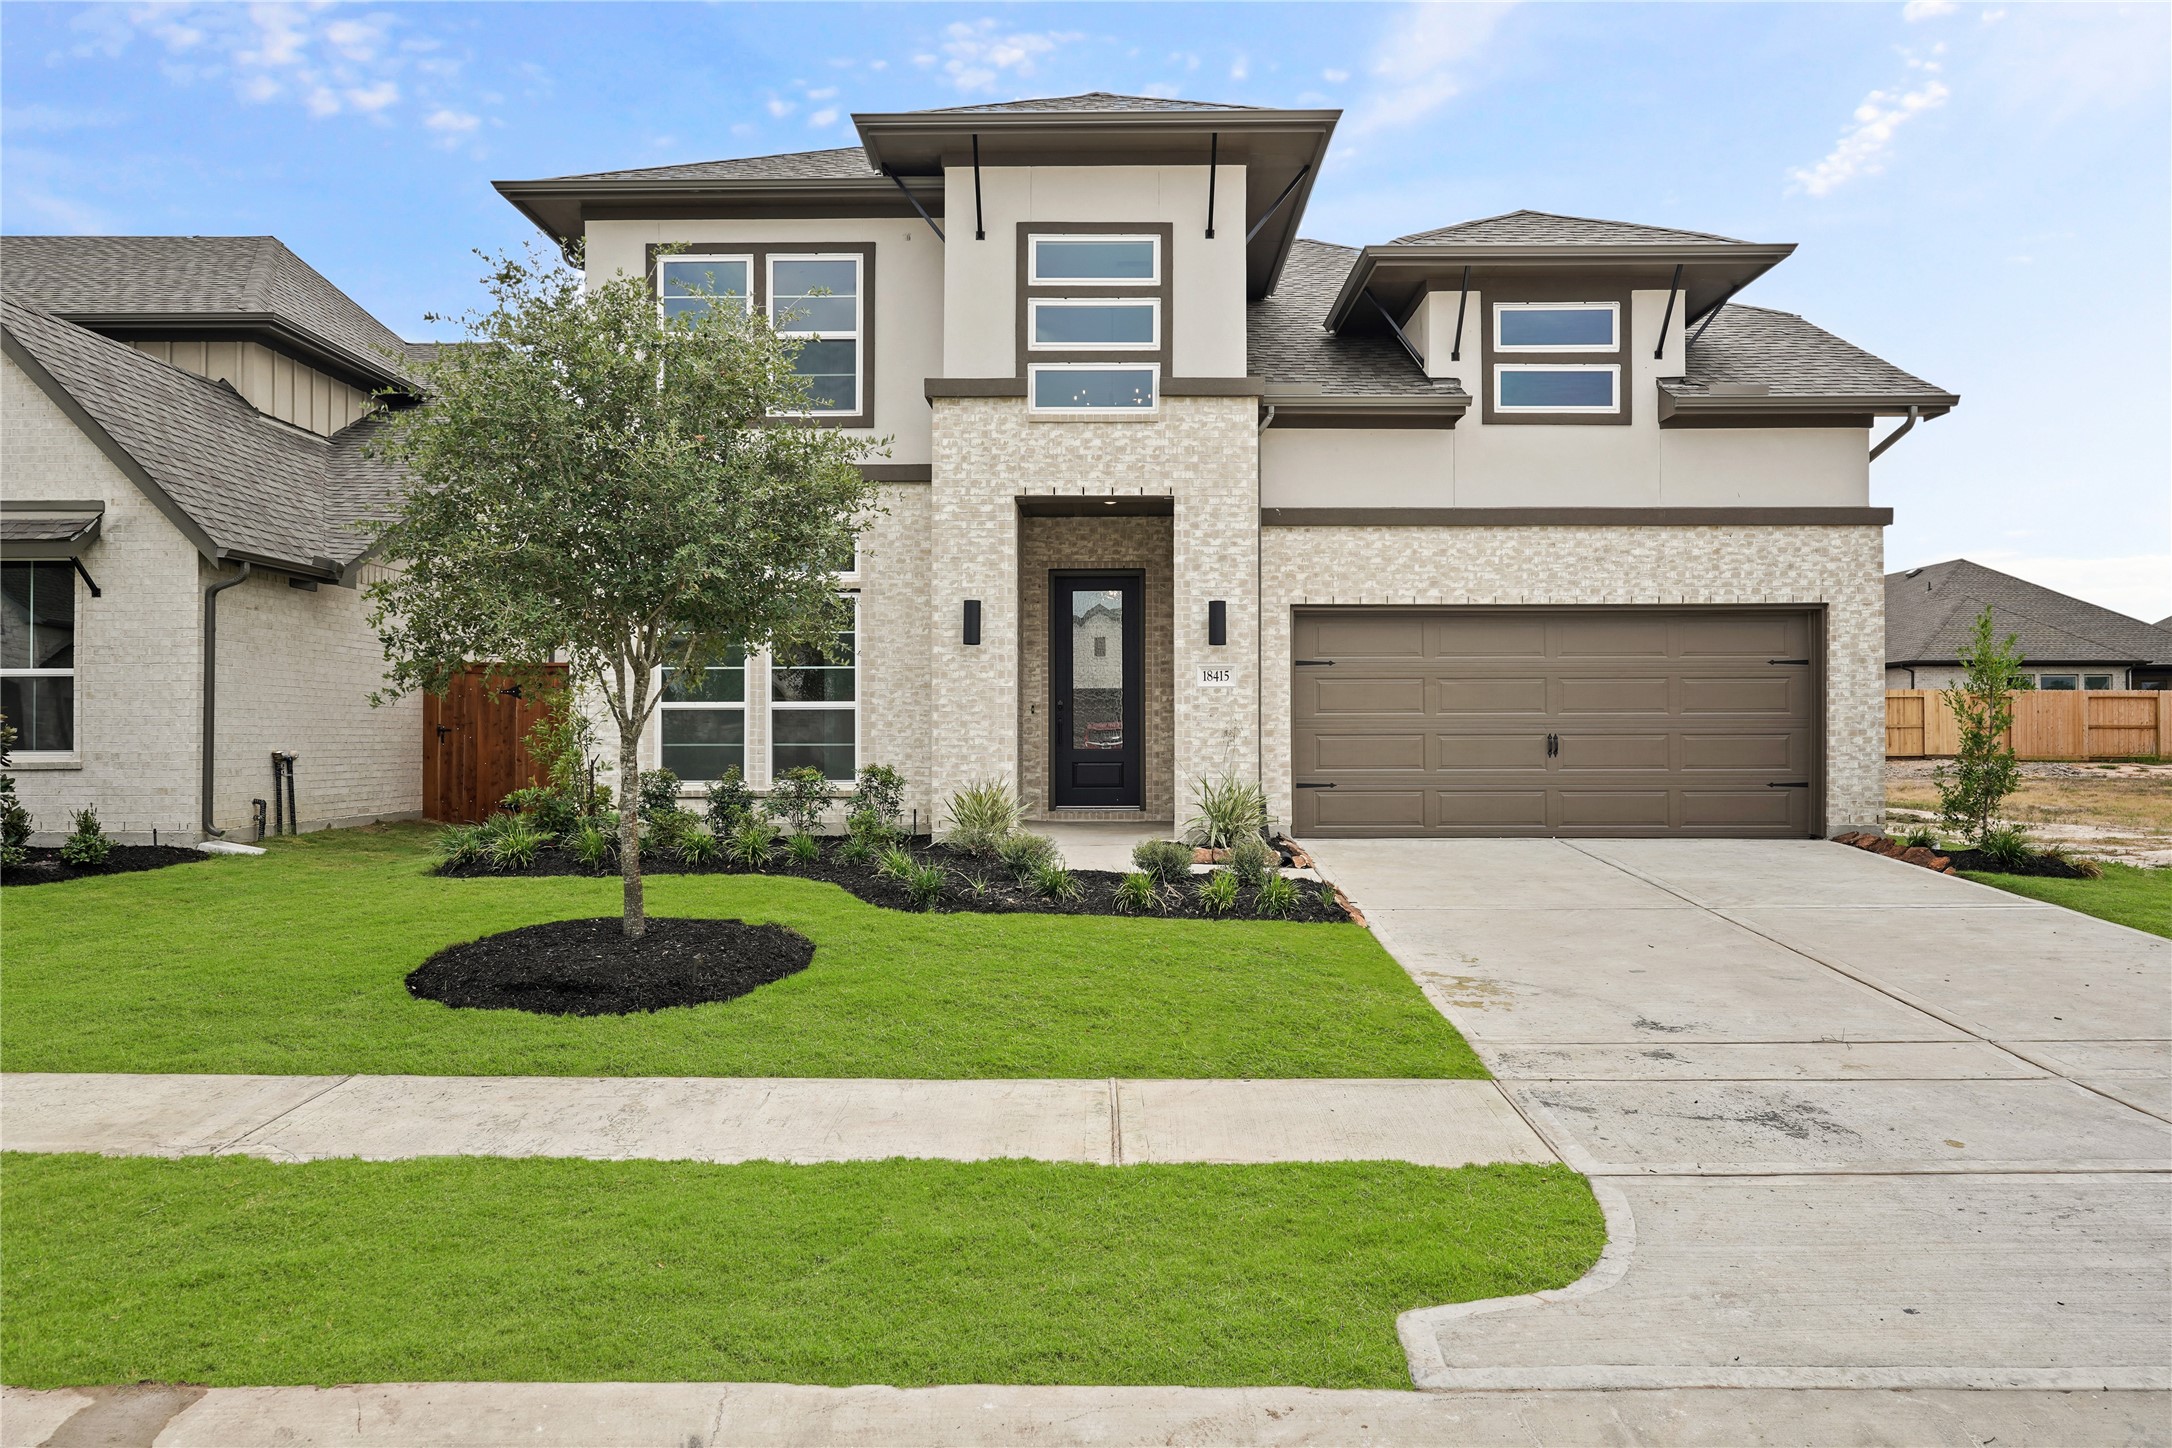 Exceptional modern elevation with brick & stucco offers lots of curb appeal!